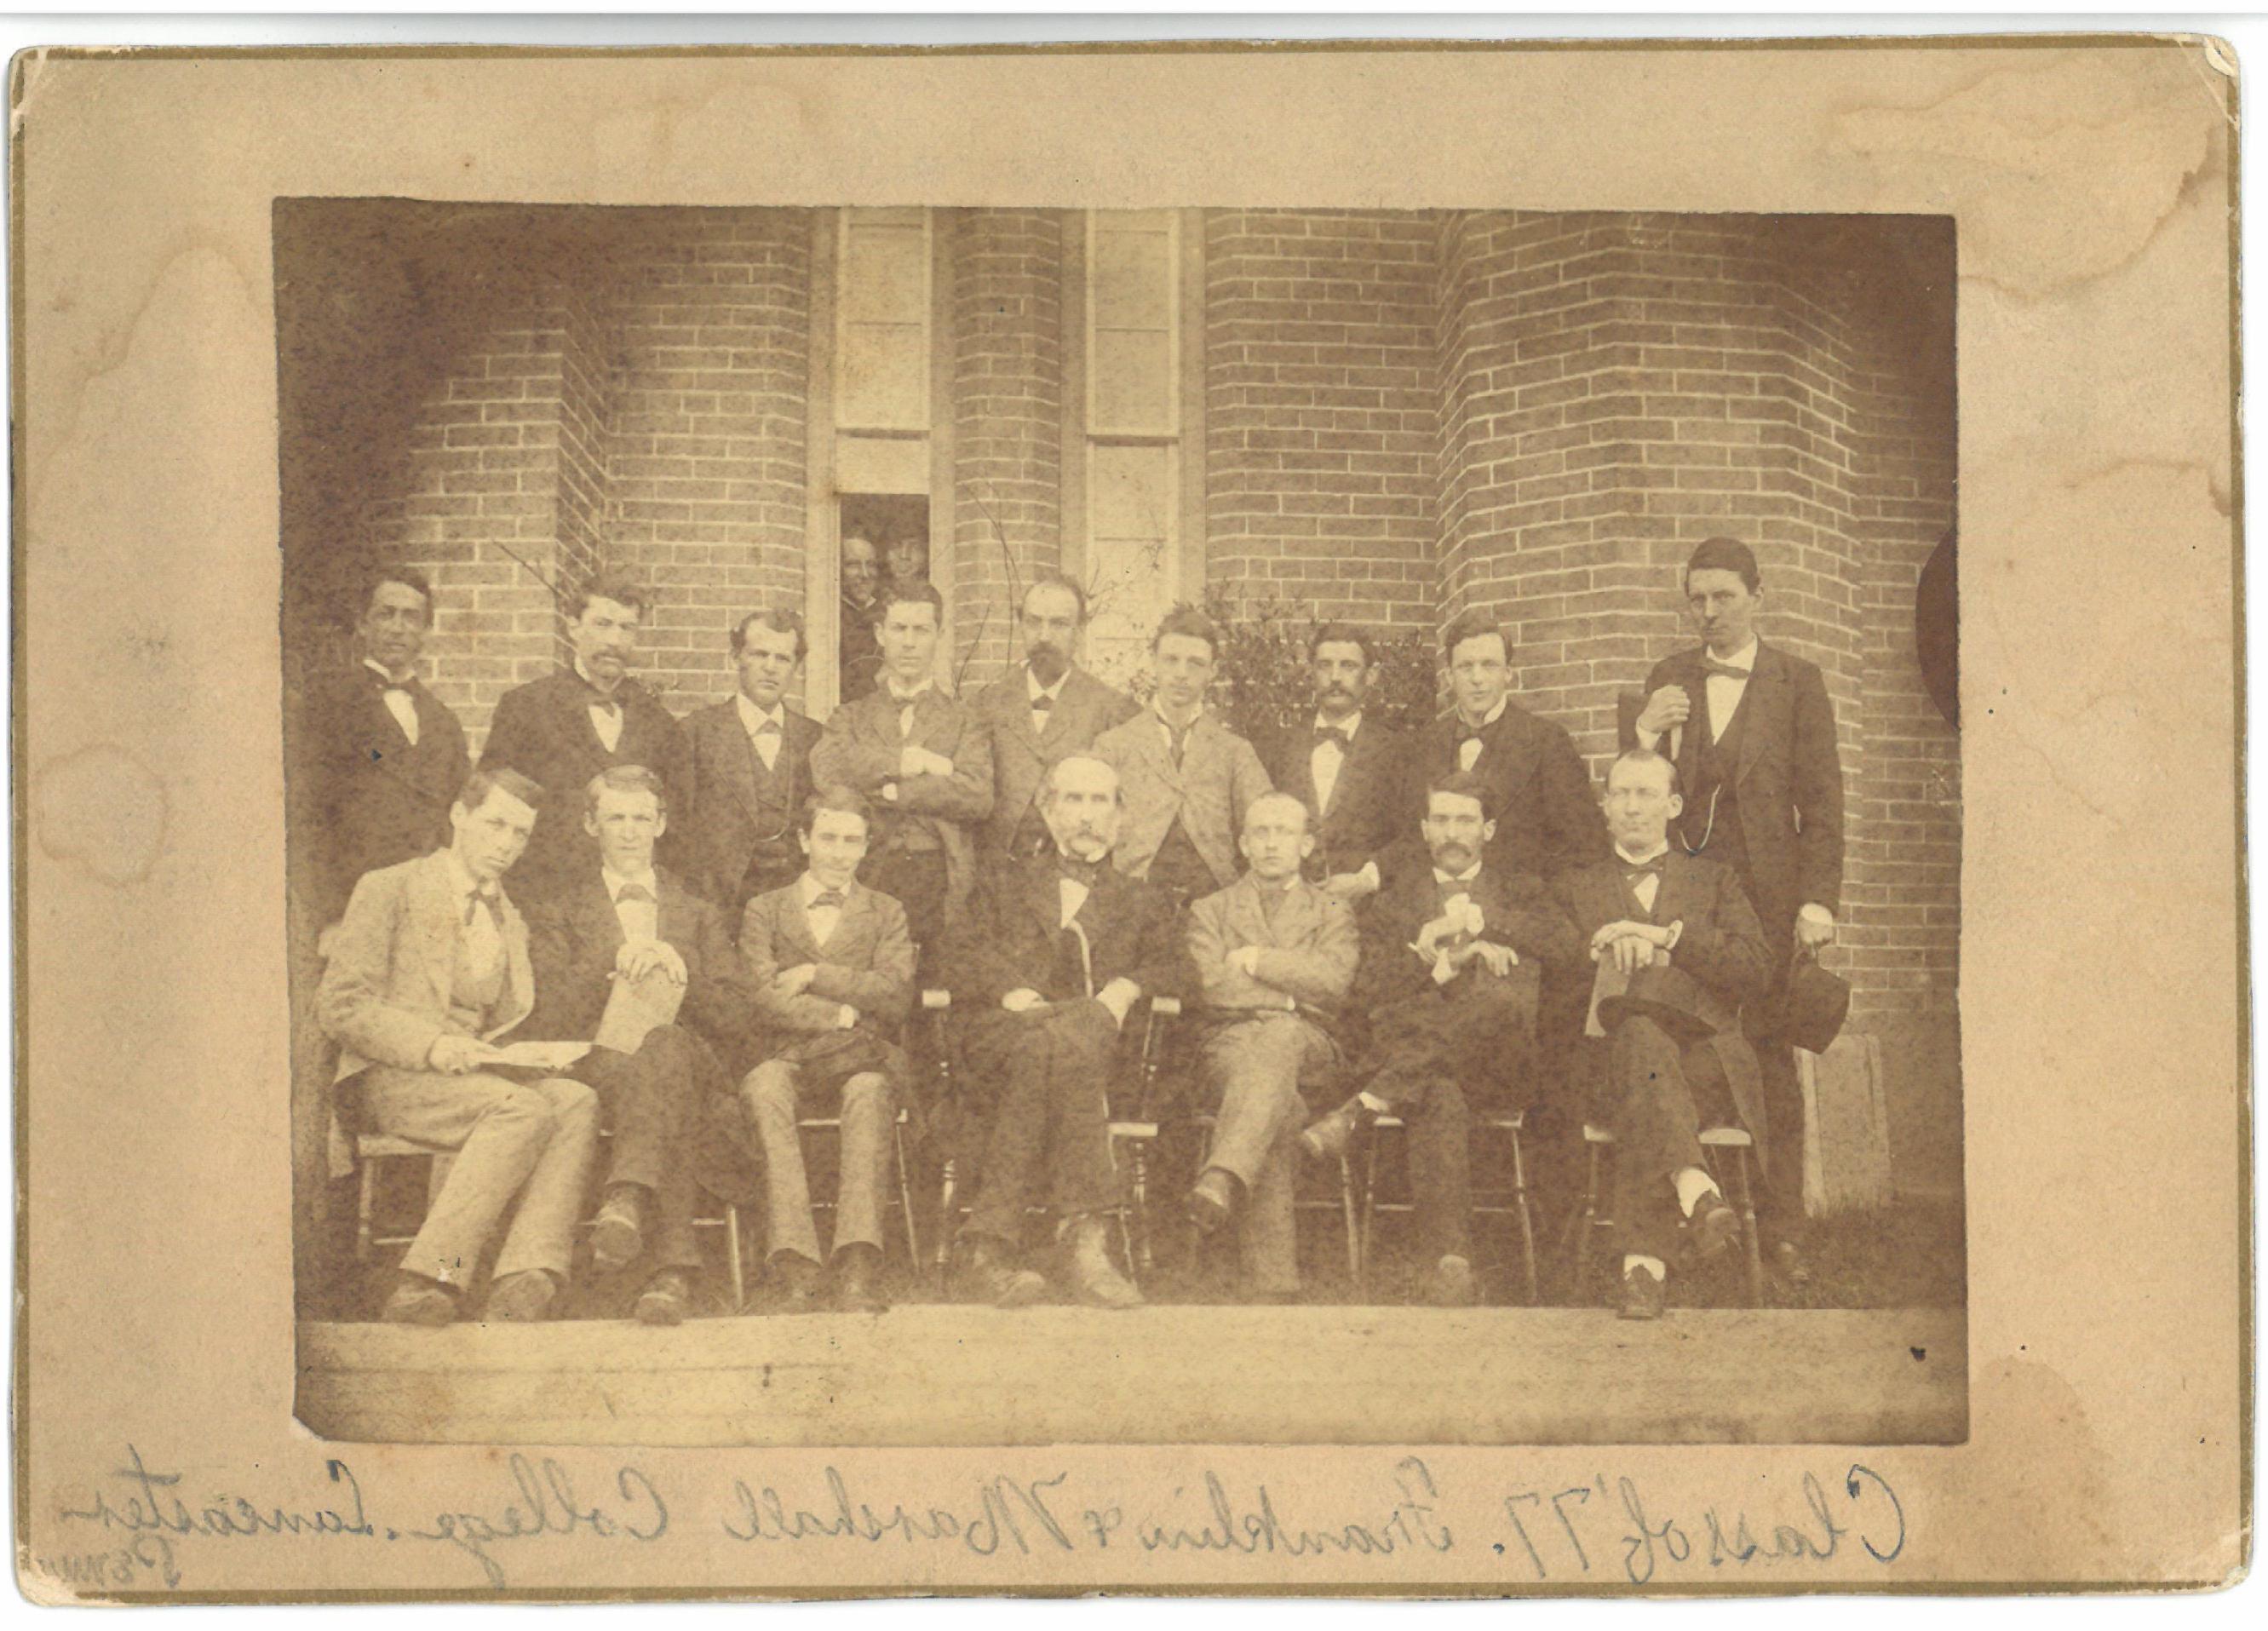 Franklin & Marshall College Class of 1877. Image Credit: F&M Archives & Special Collections